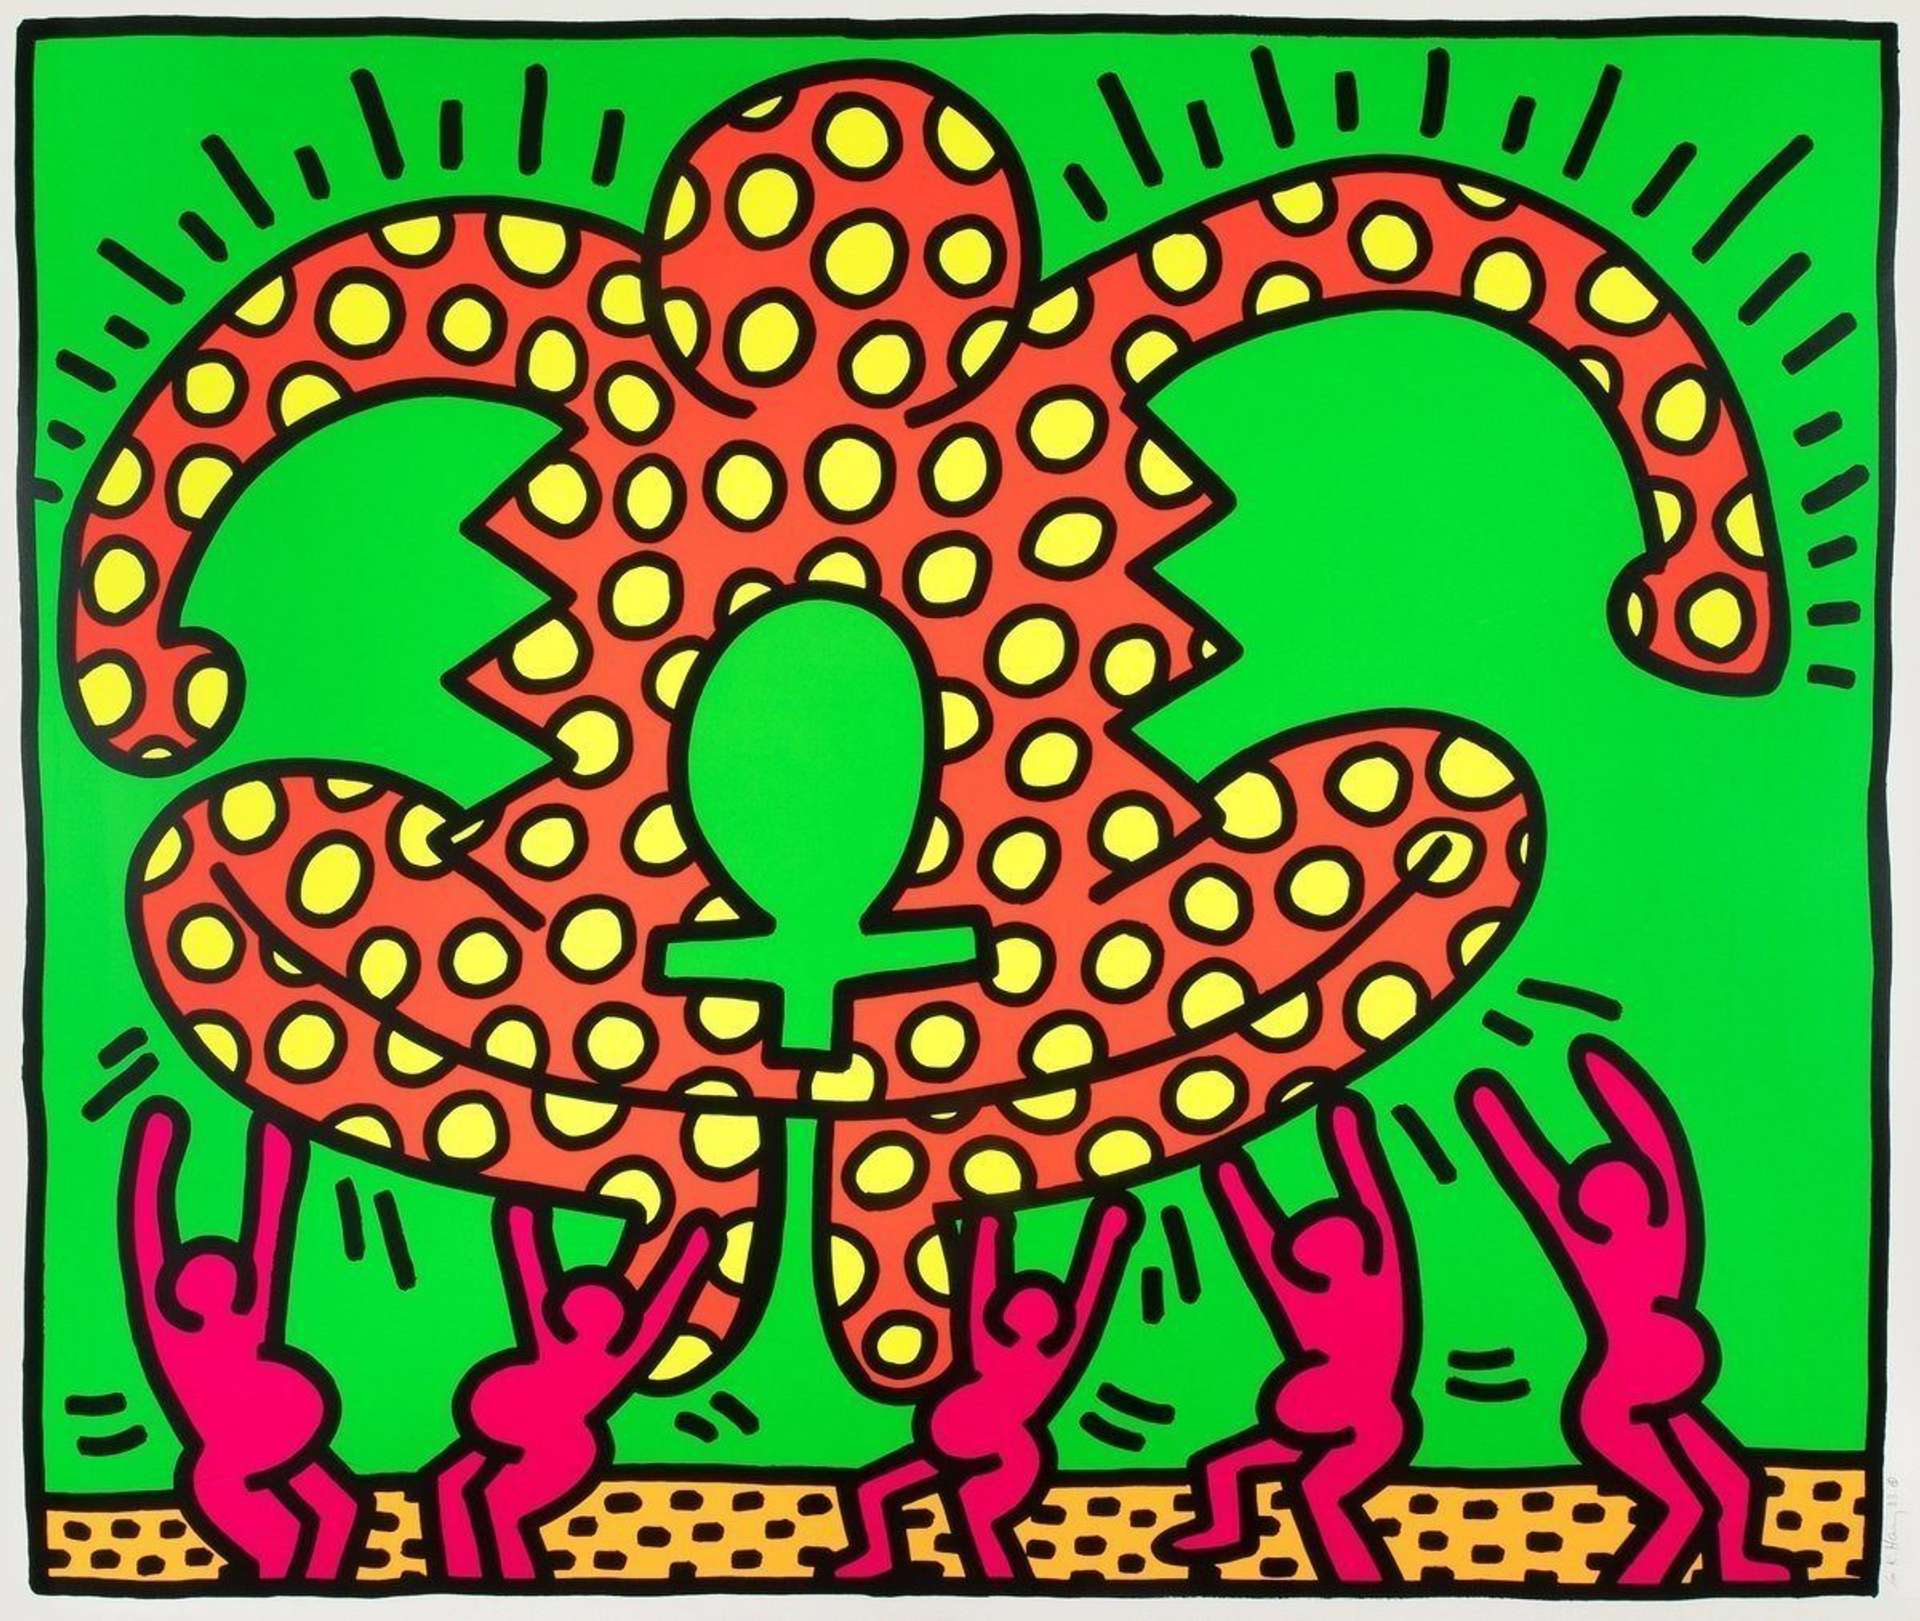 Keith Haring’s Fertility 5. A Pop Art screenprint of a red figure with yellow polka dots with pink pregnant figures lifting her up.